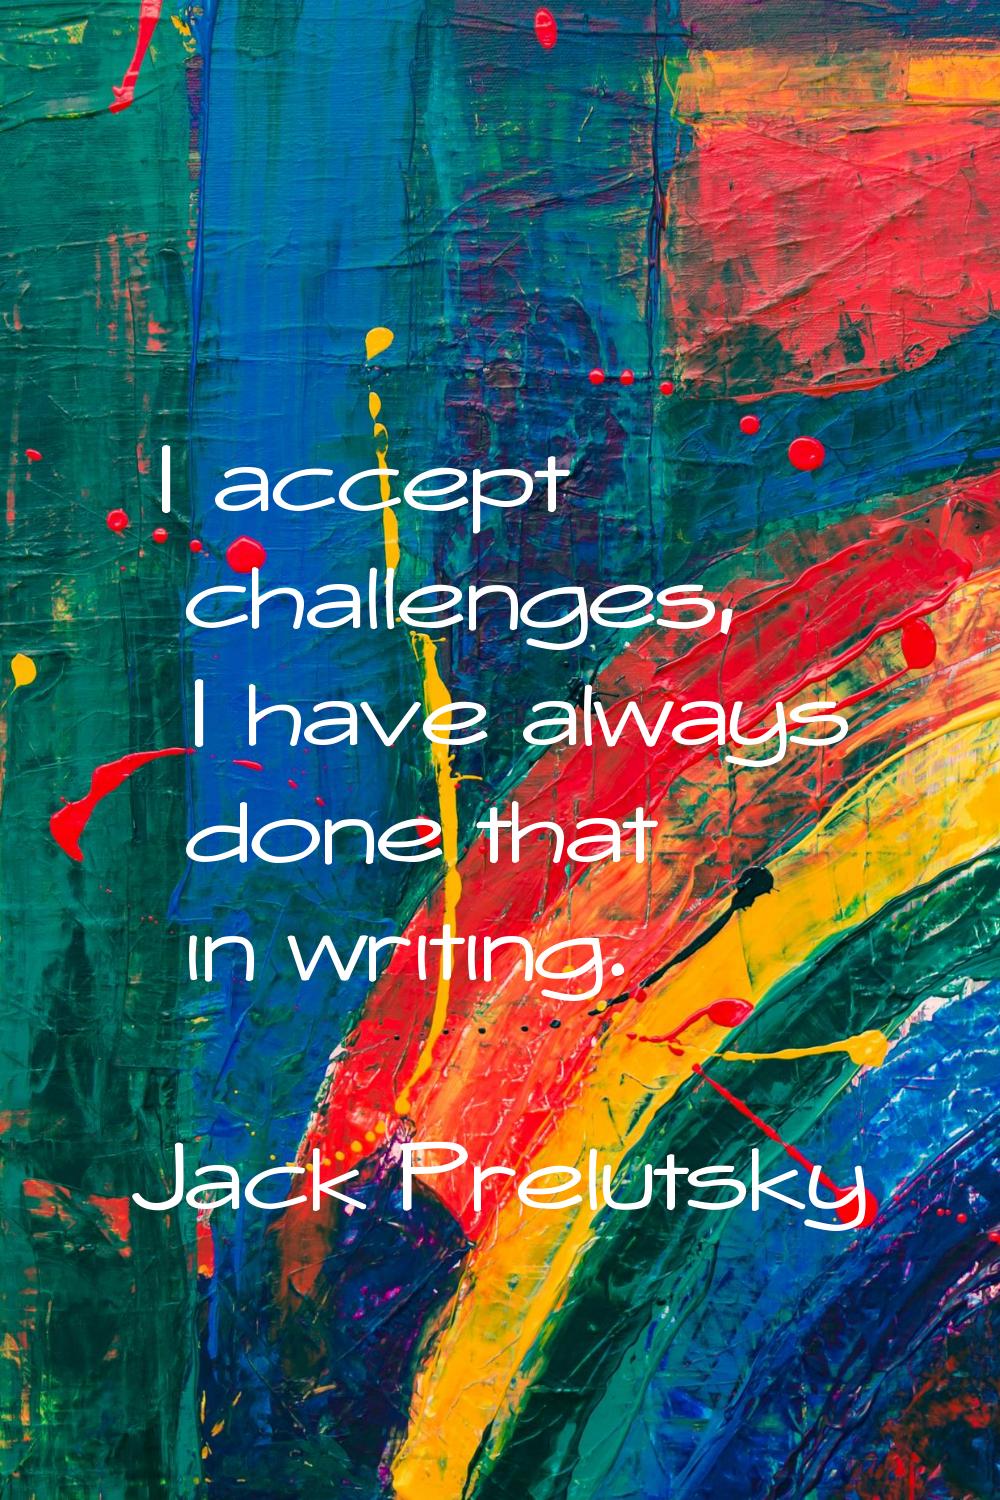 I accept challenges, I have always done that in writing.